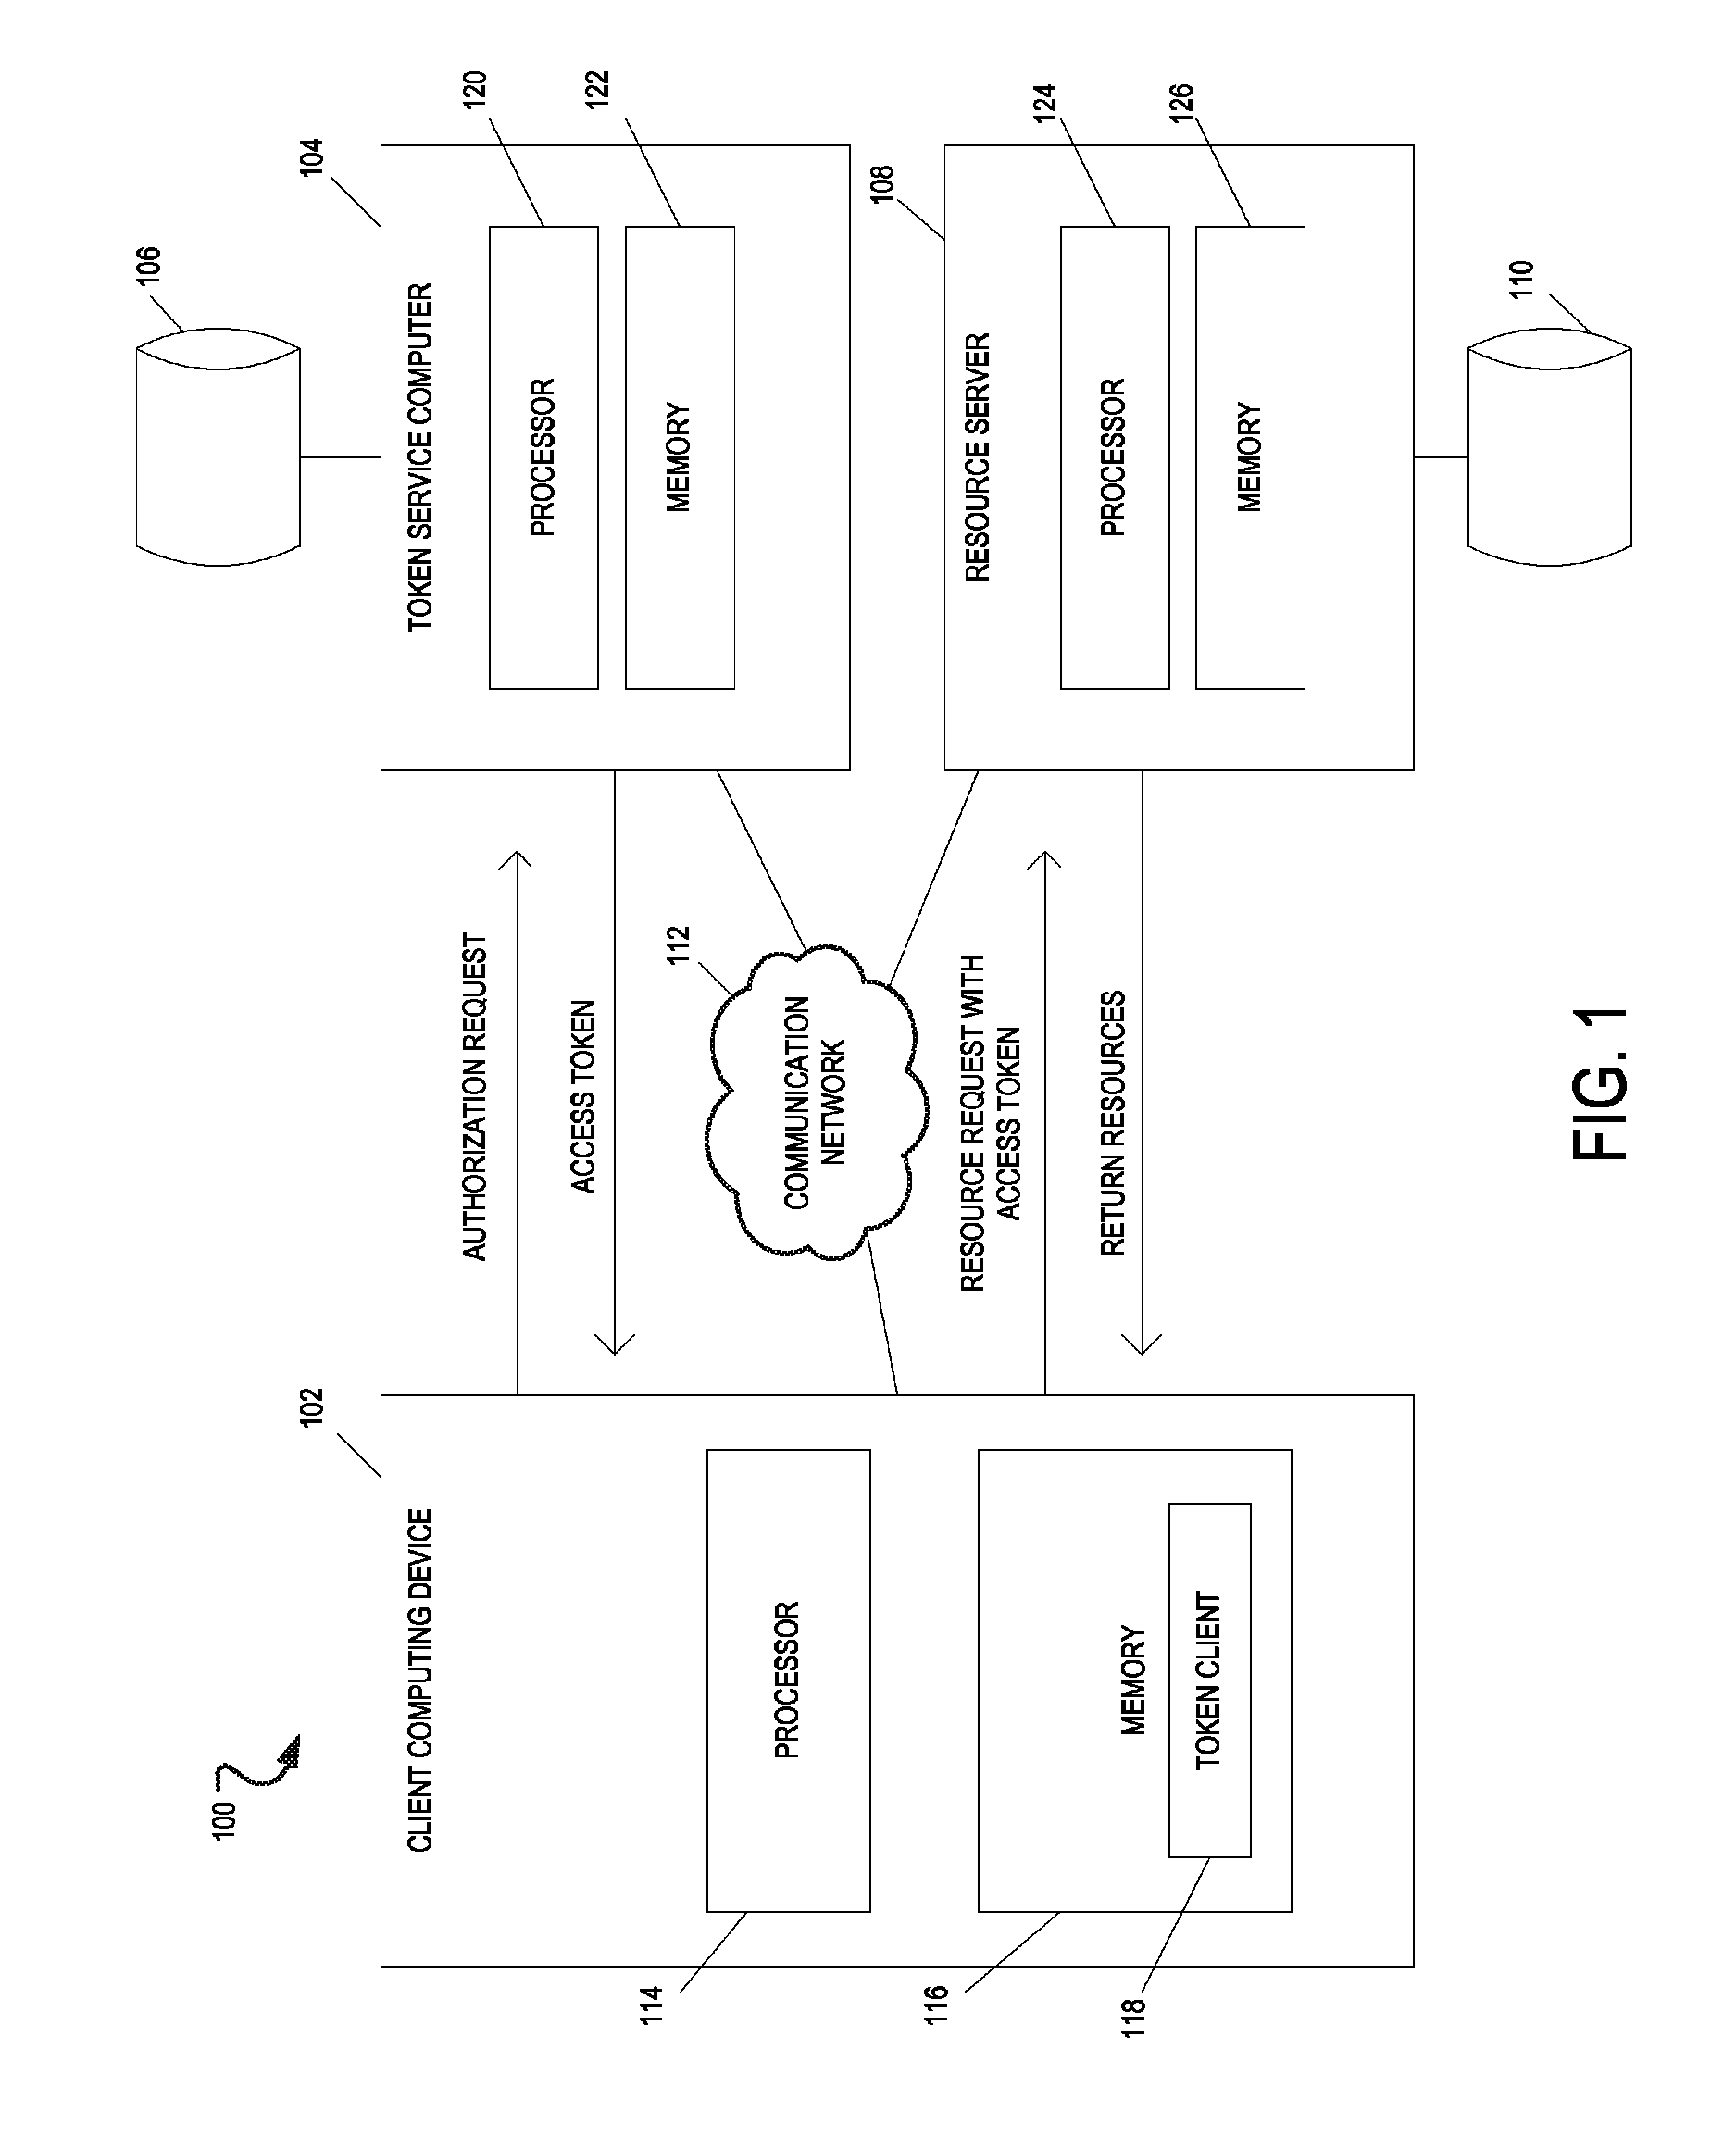 Authorization token cache system and method